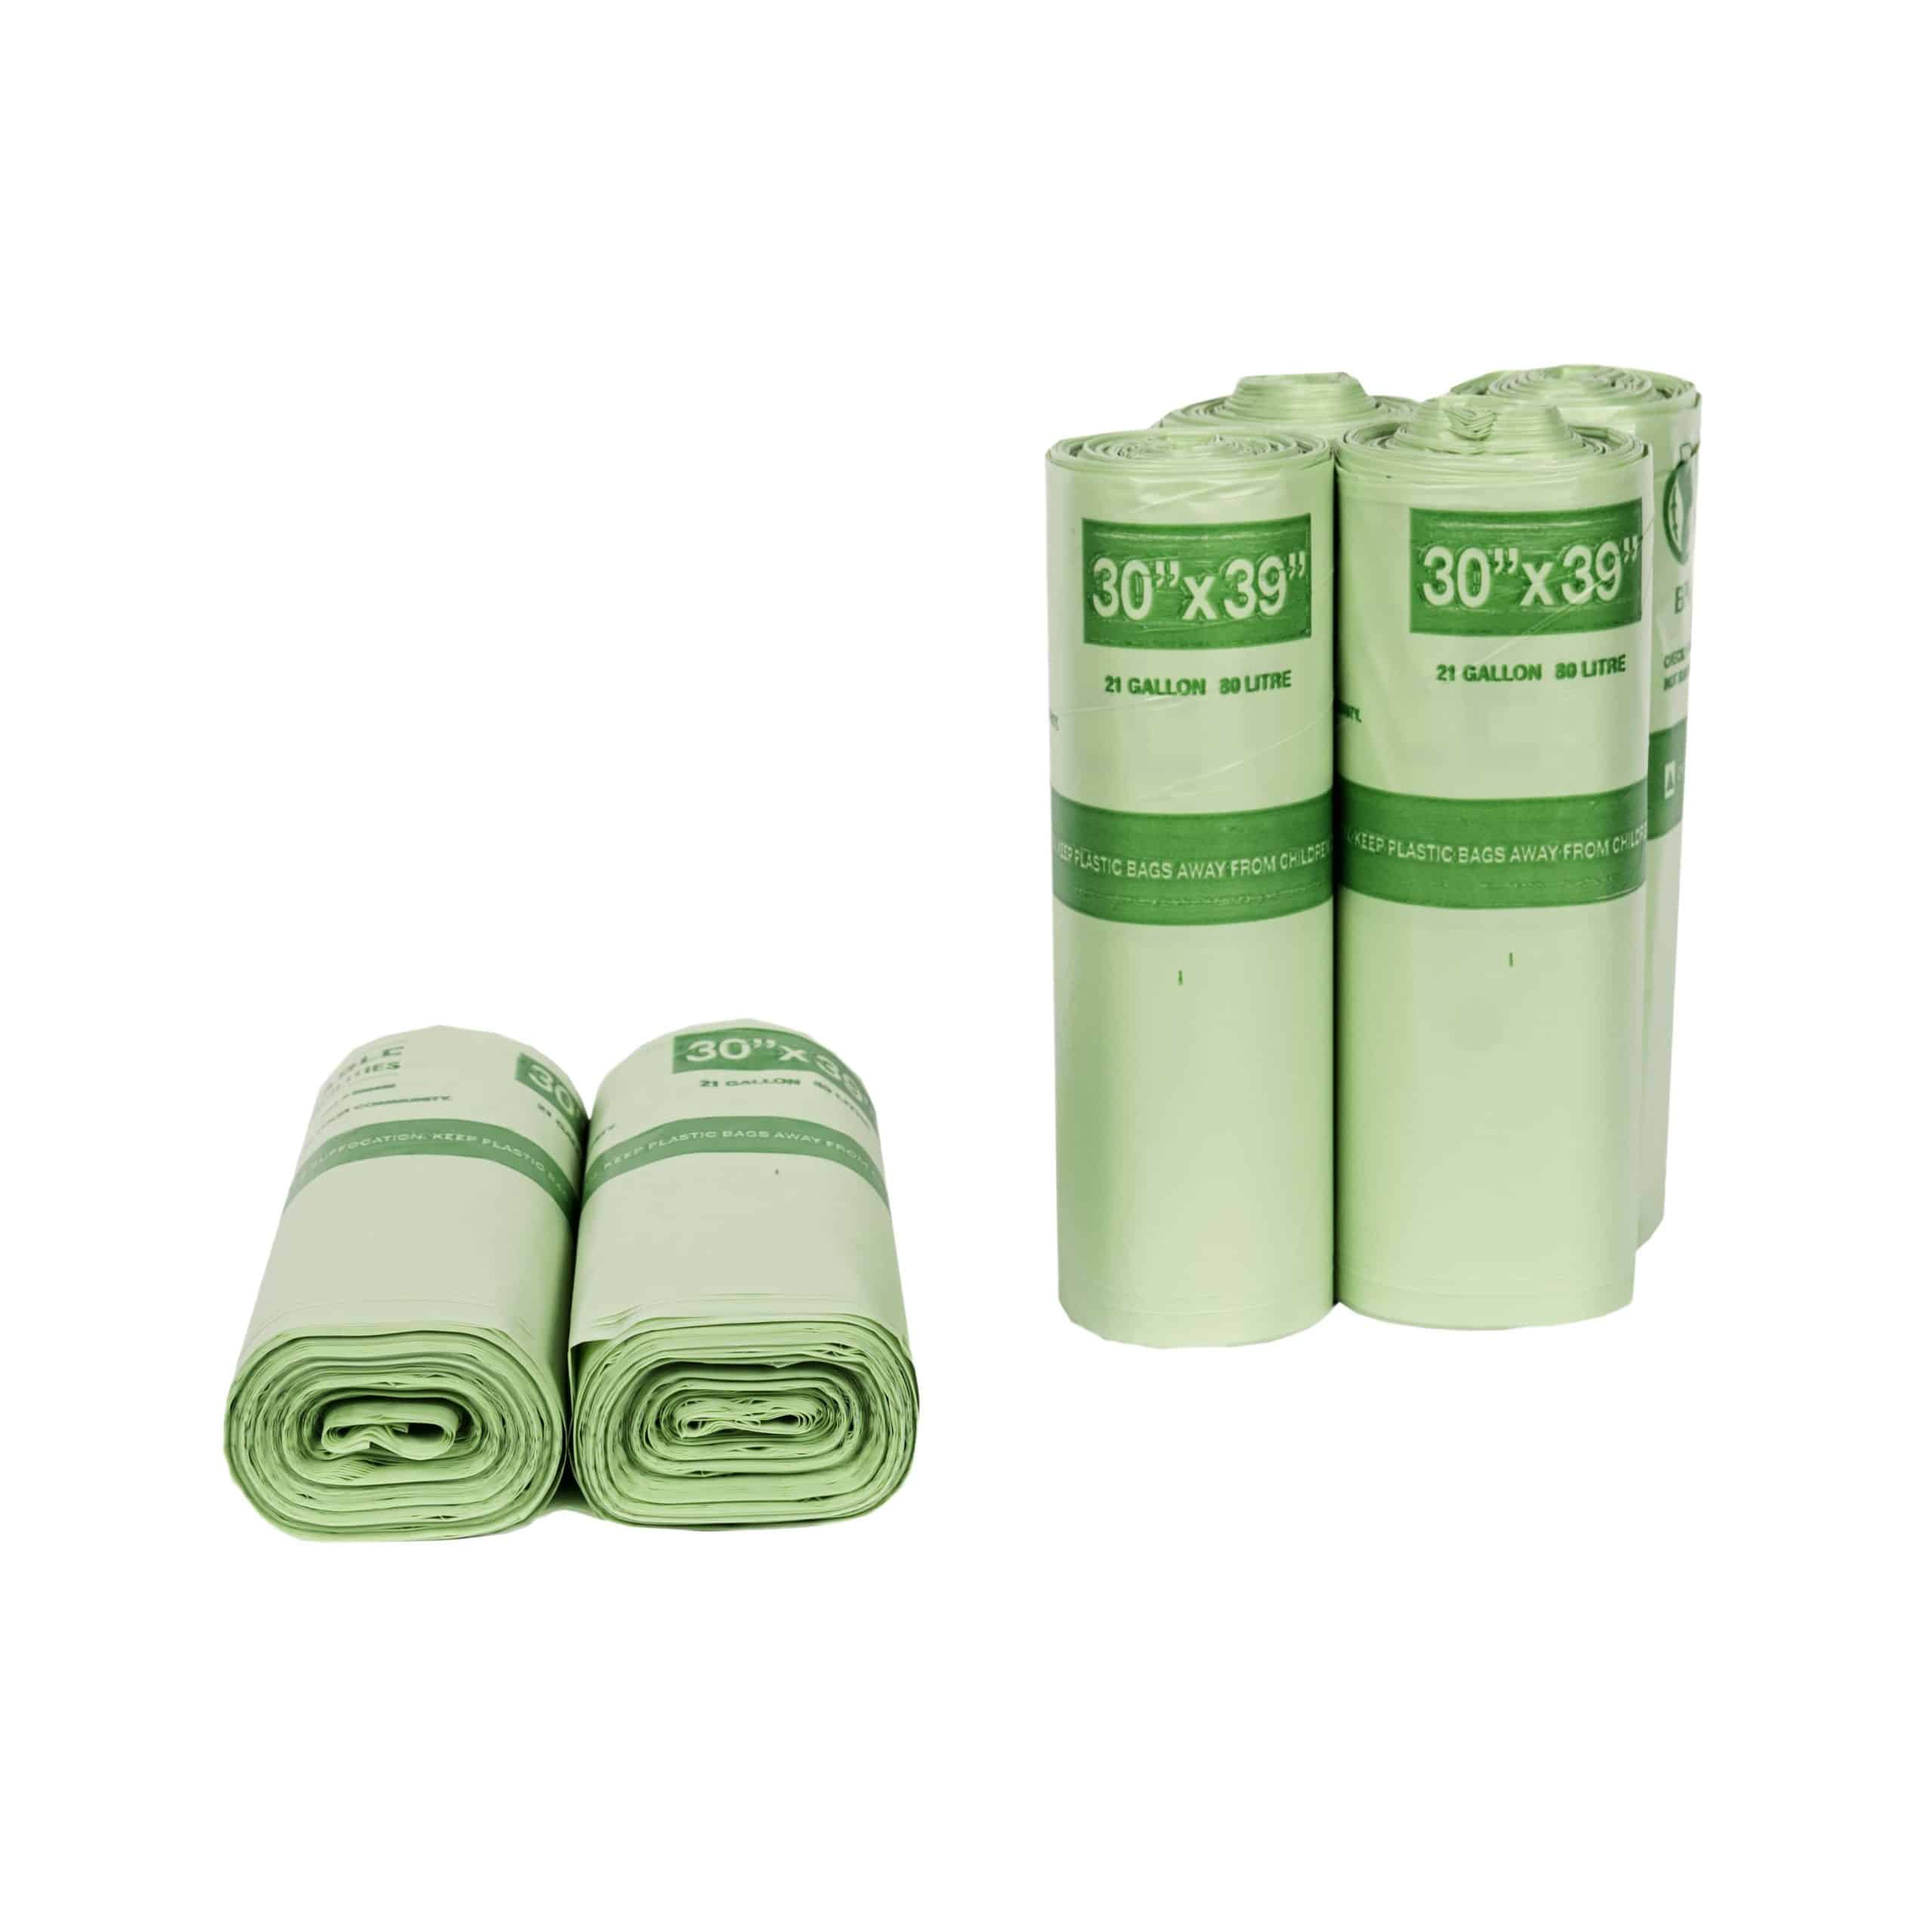 EcoSafe-Compostable-Bags-Hb3039-8-Rolls-min